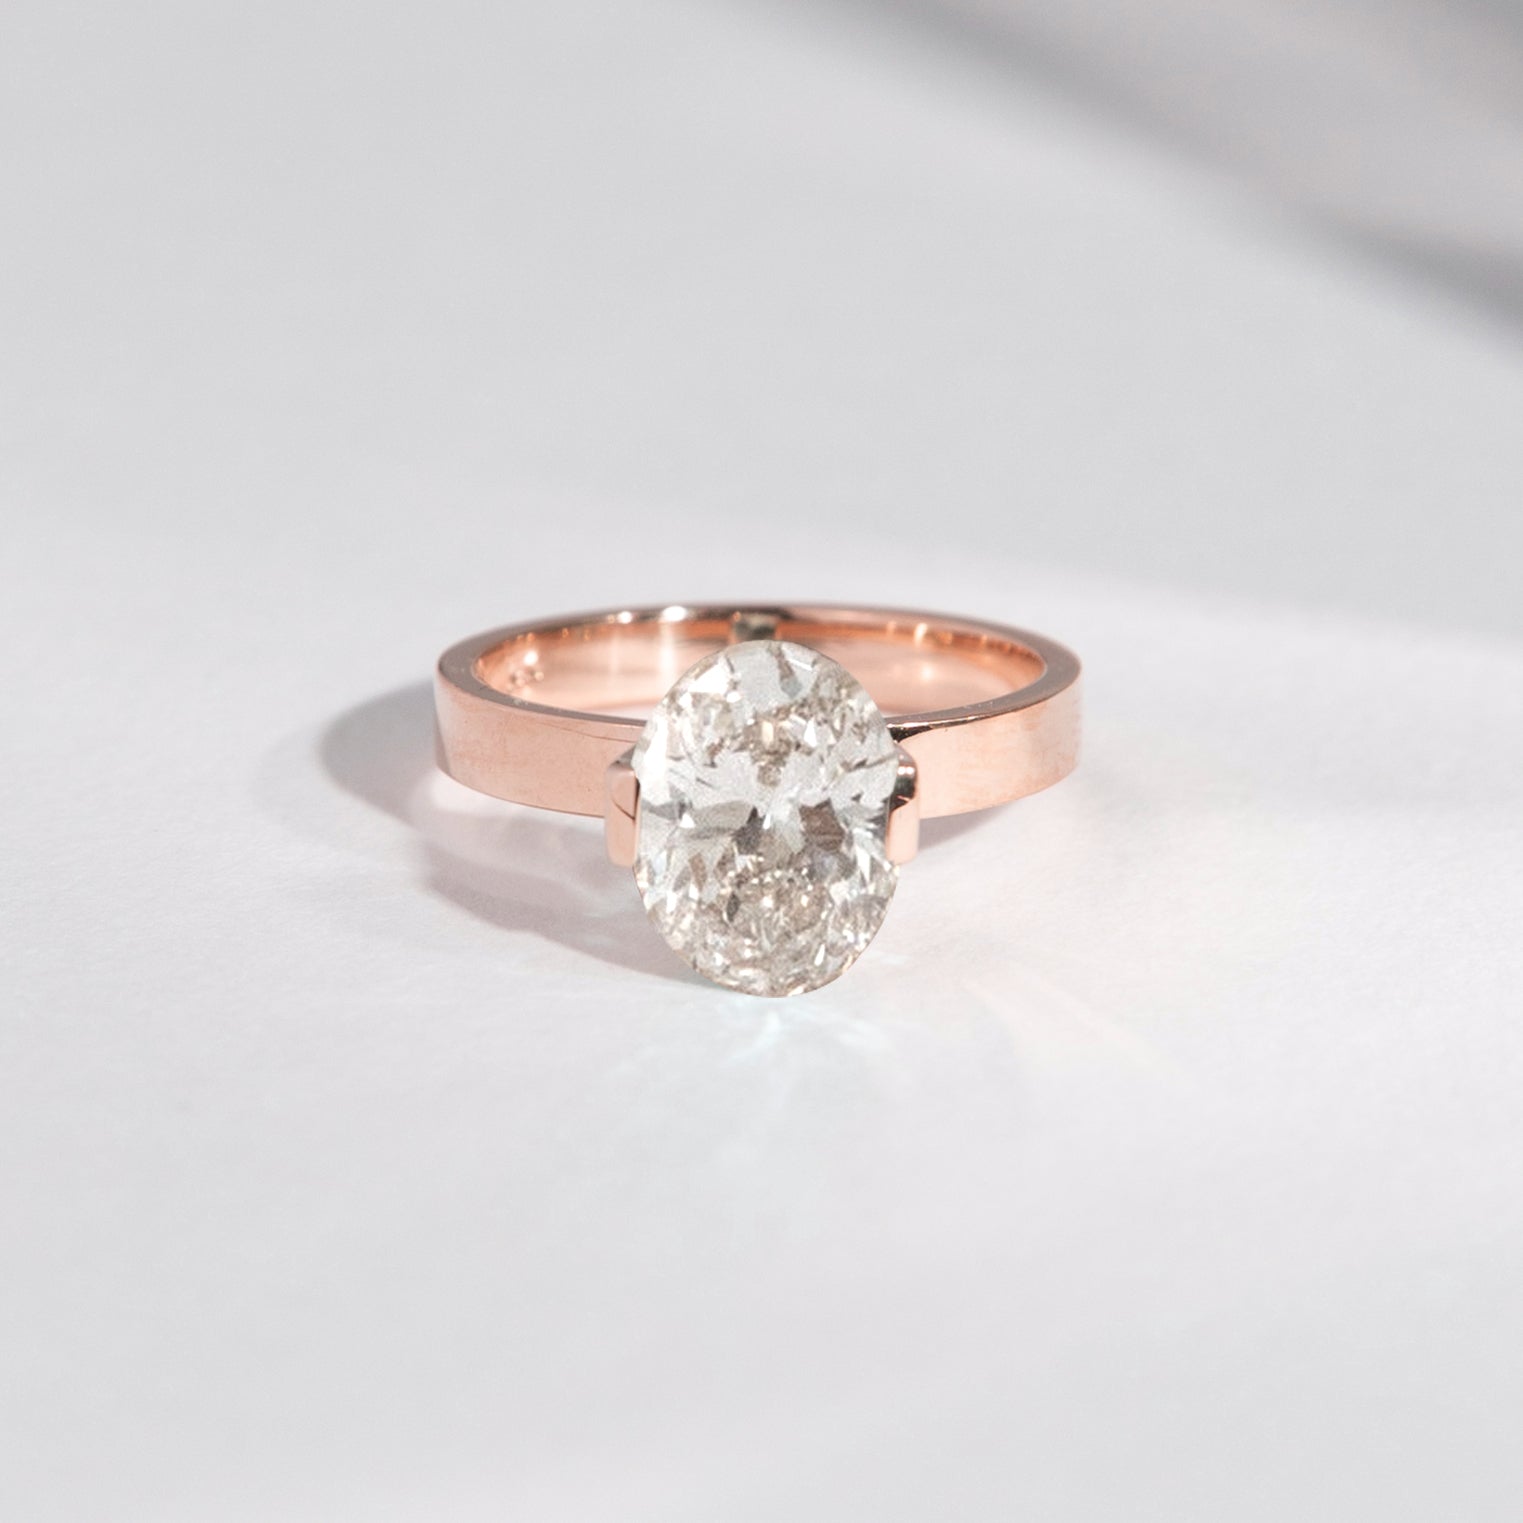 Silva Unique Ring in 14k Gold set with an oval brilliant cut lab-grown diamond By SHW Fine Jewelry NYC